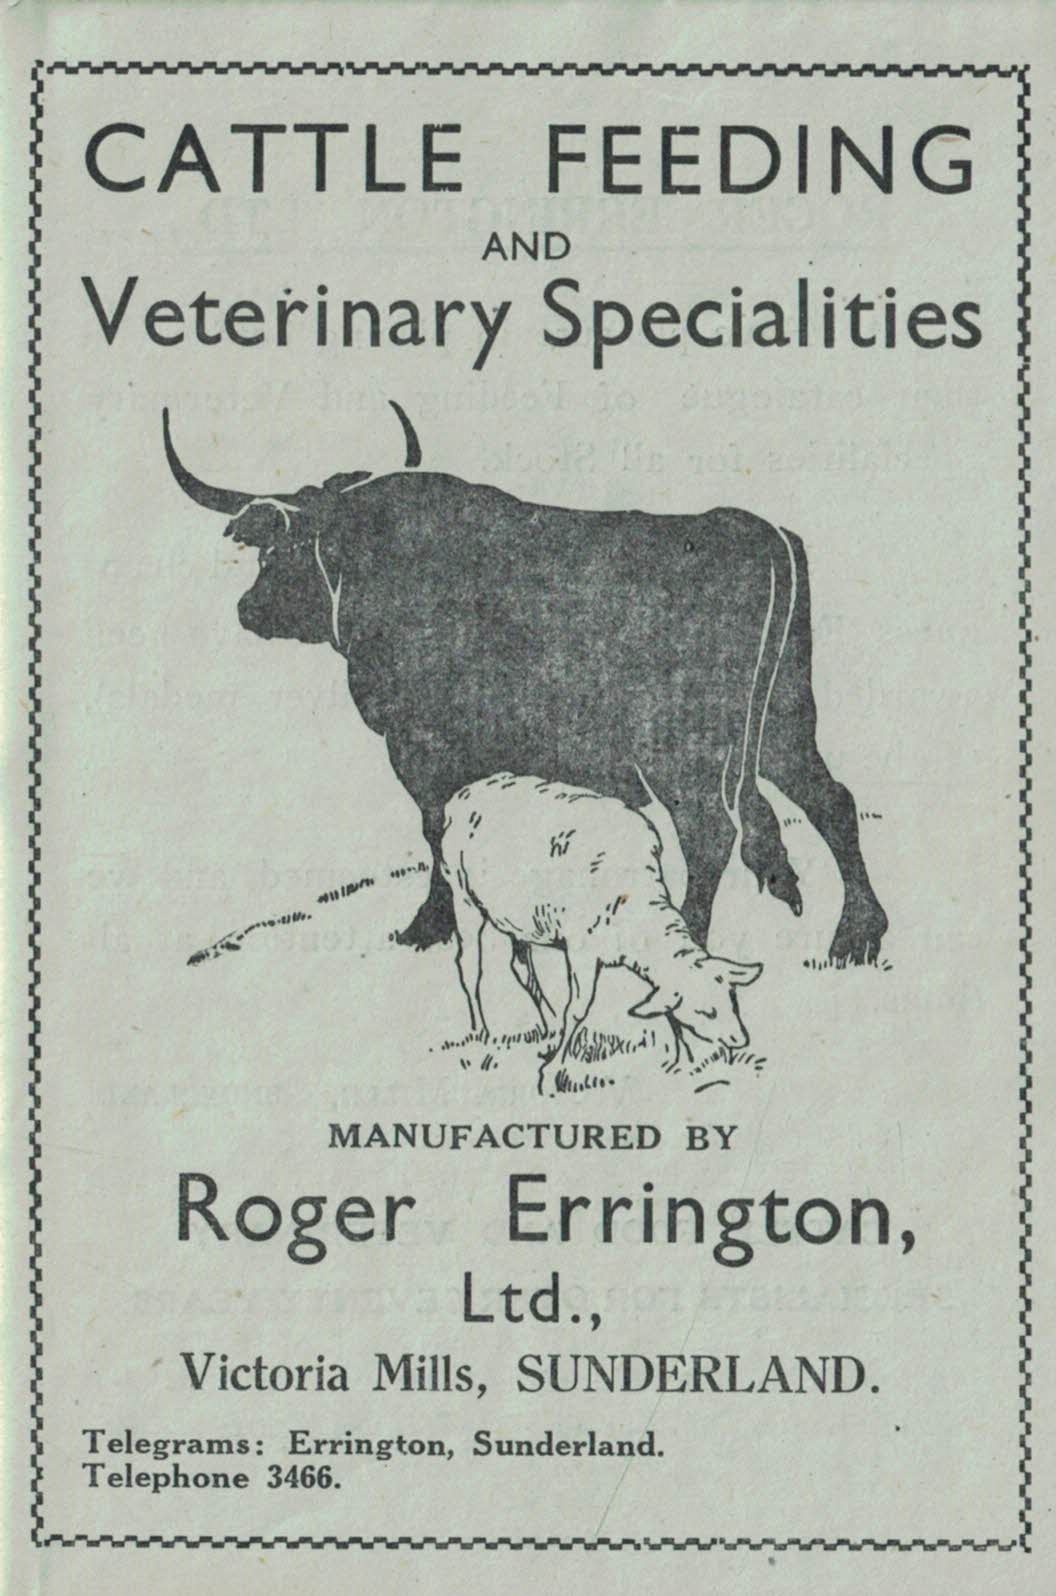 Cattle Feeding and Veterinary Specialities Manufactured by Roger Errington, Ltd.